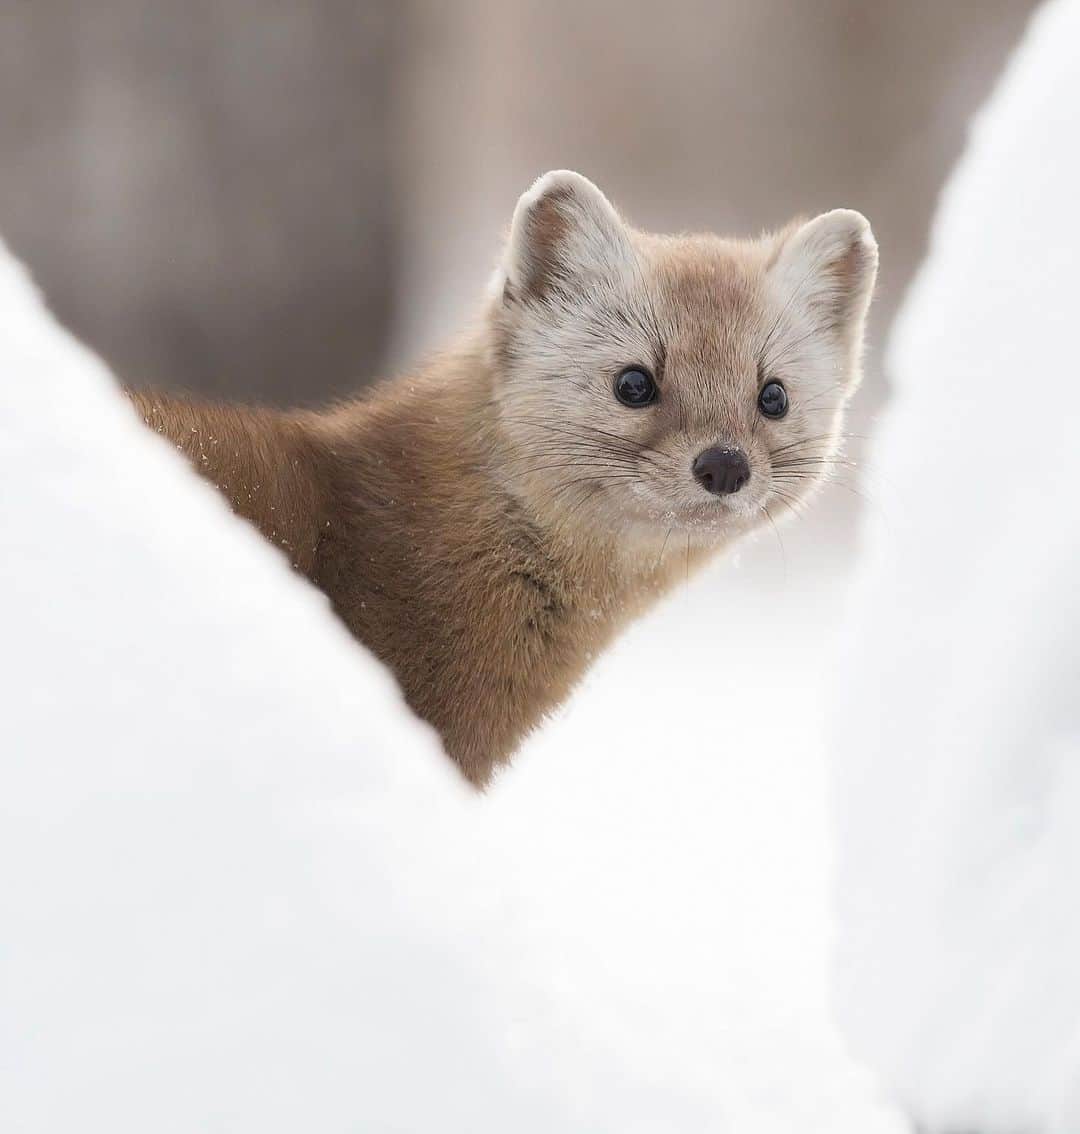 Chase Dekker Wild-Life Imagesのインスタグラム：「Still in the process of downloading thousands of images and deciding where to begin. In the meantime, here’s a new click of a pine marten from my week spent with these sleek hunters in eastern Canada. While you can find these weasels wandering around the forests of North America any month, winter tends to be the best time to find them.」